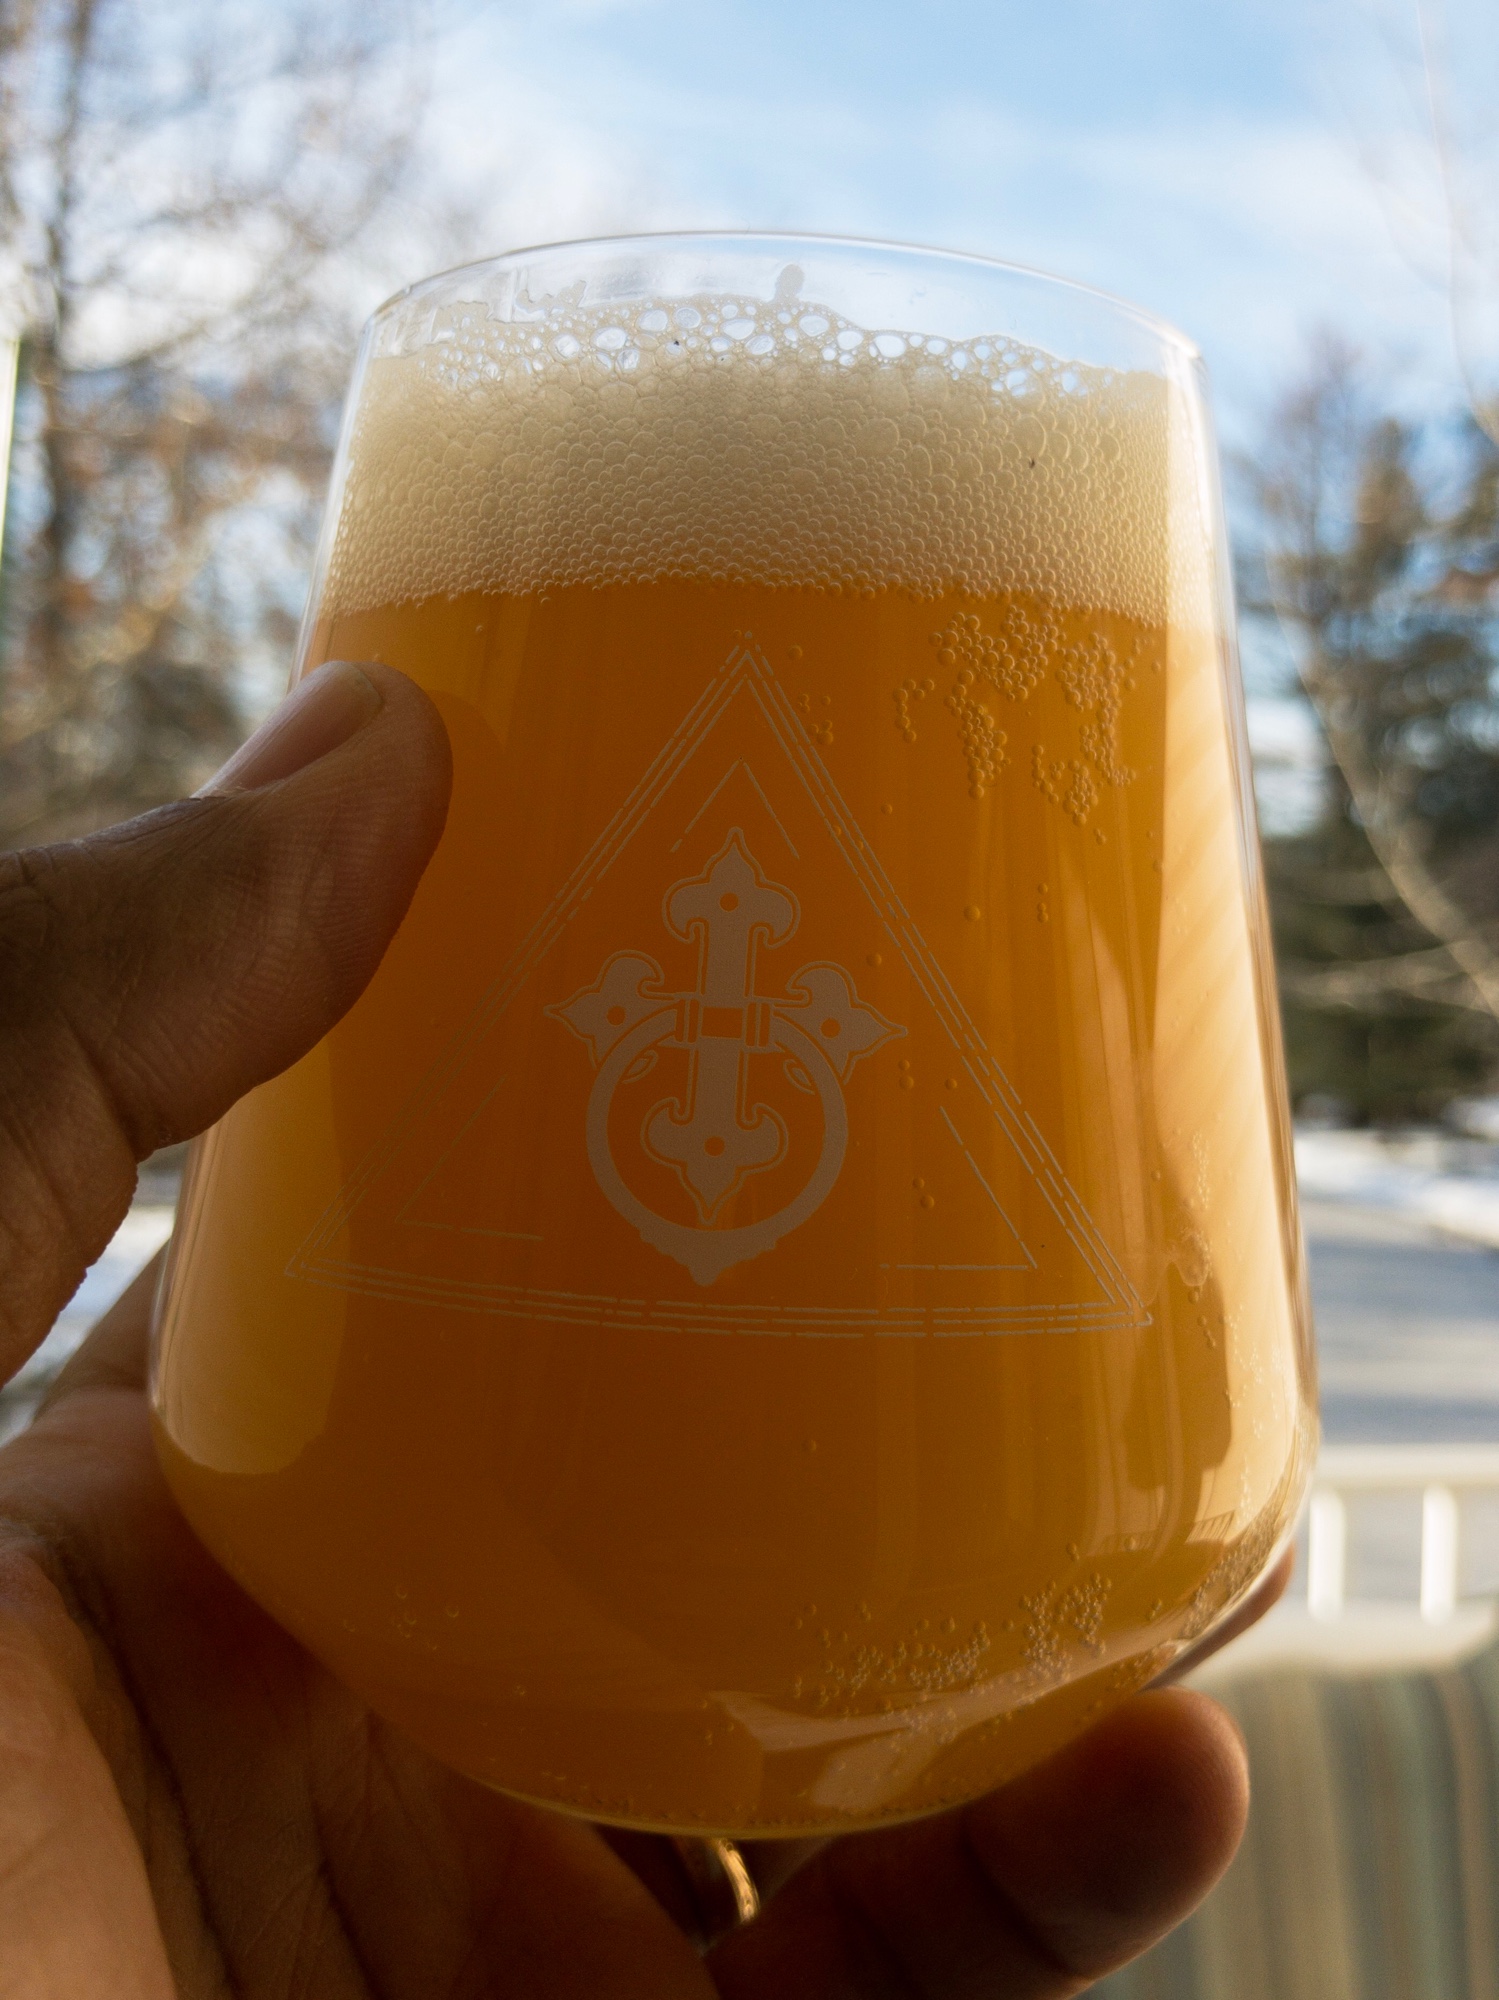 Conclave Brewing's Isolation: Citra